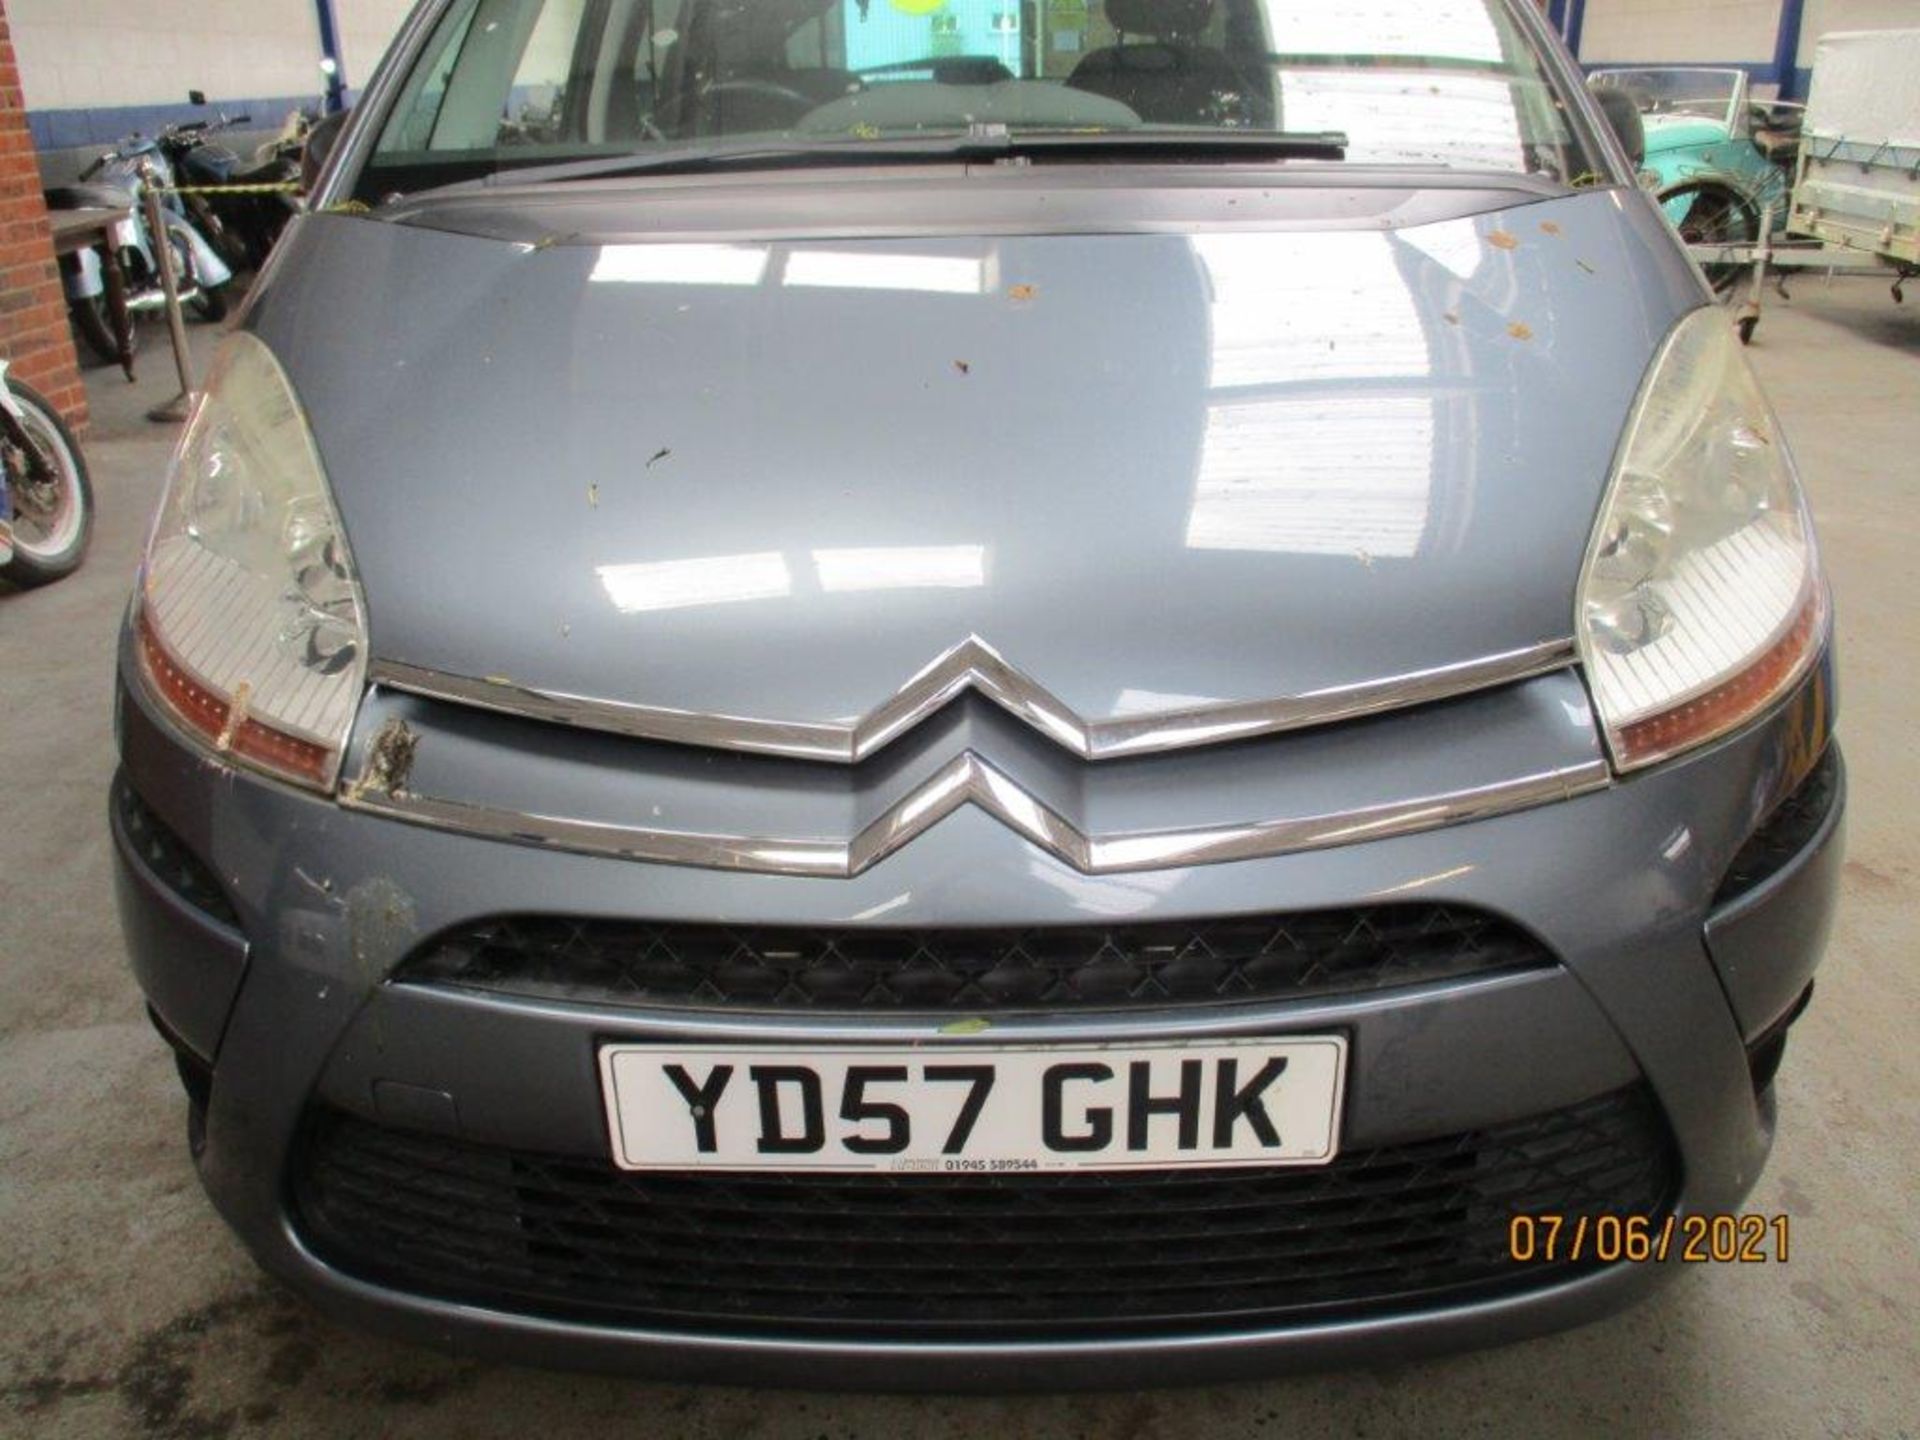 57 07 Citroen C4 Picasso 5 VTR+ HDI - Image 2 of 17